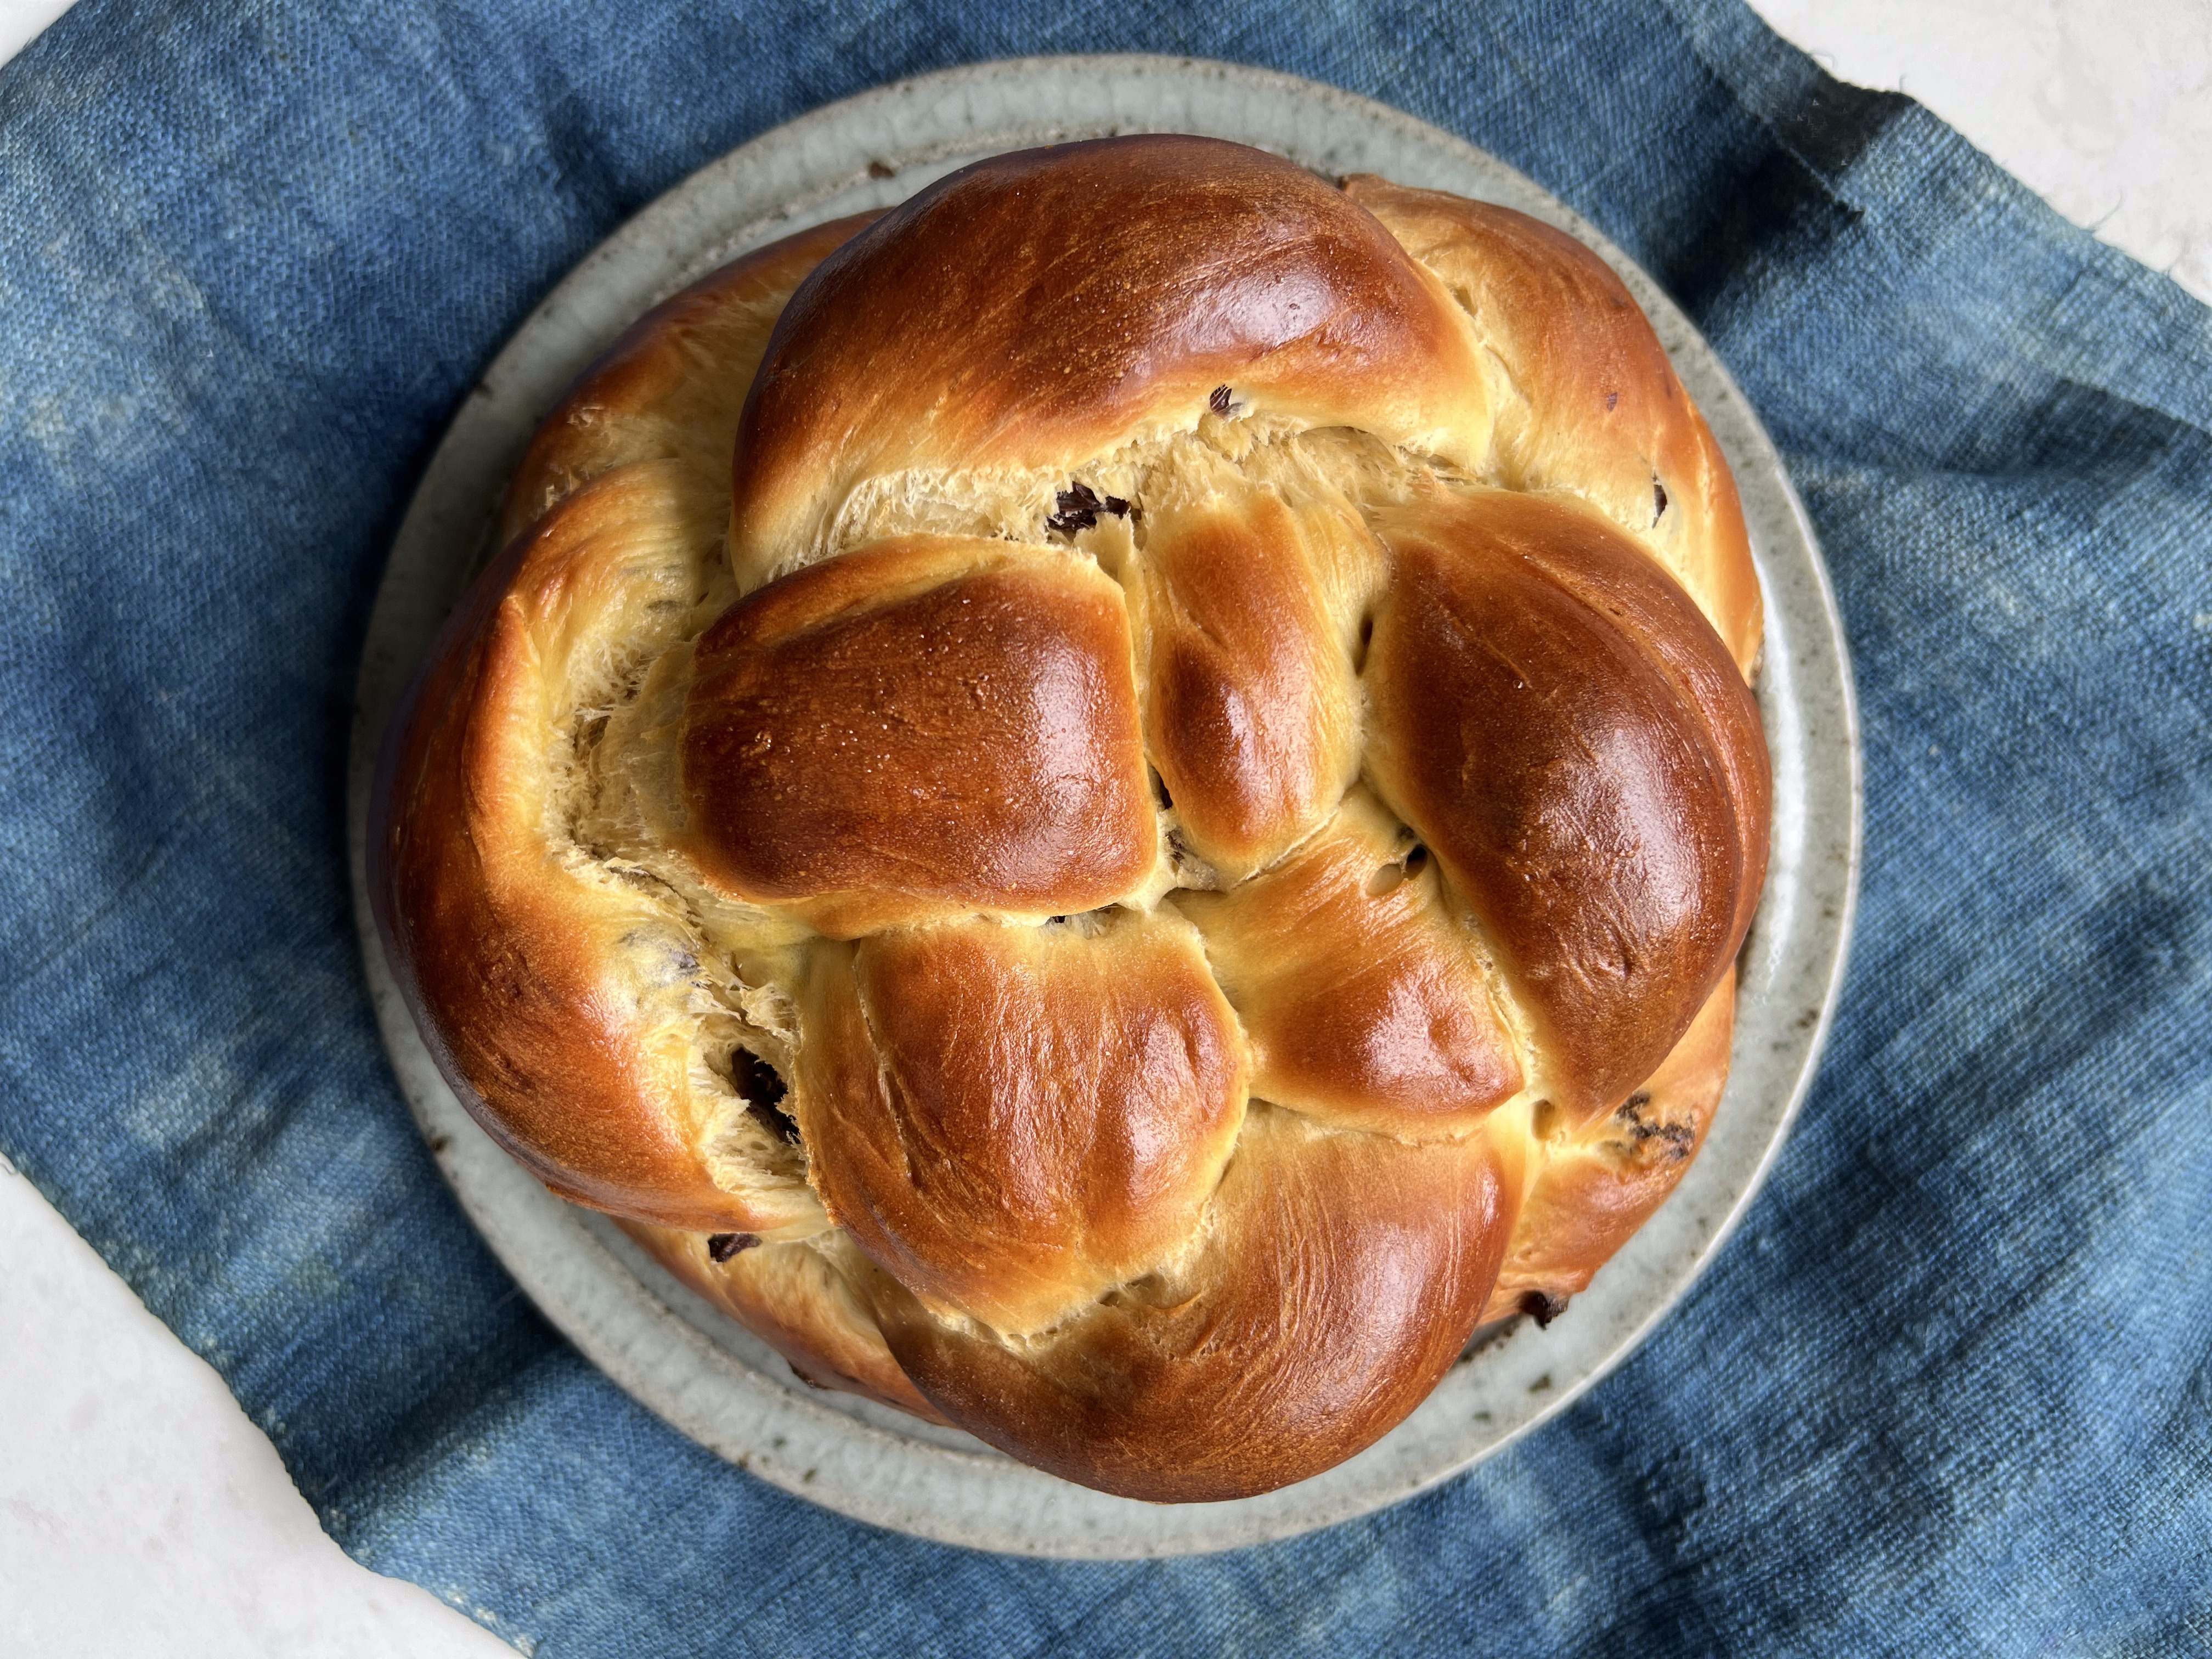 A round loaf of braided challah sitting on top of a plate and a blue napkin.